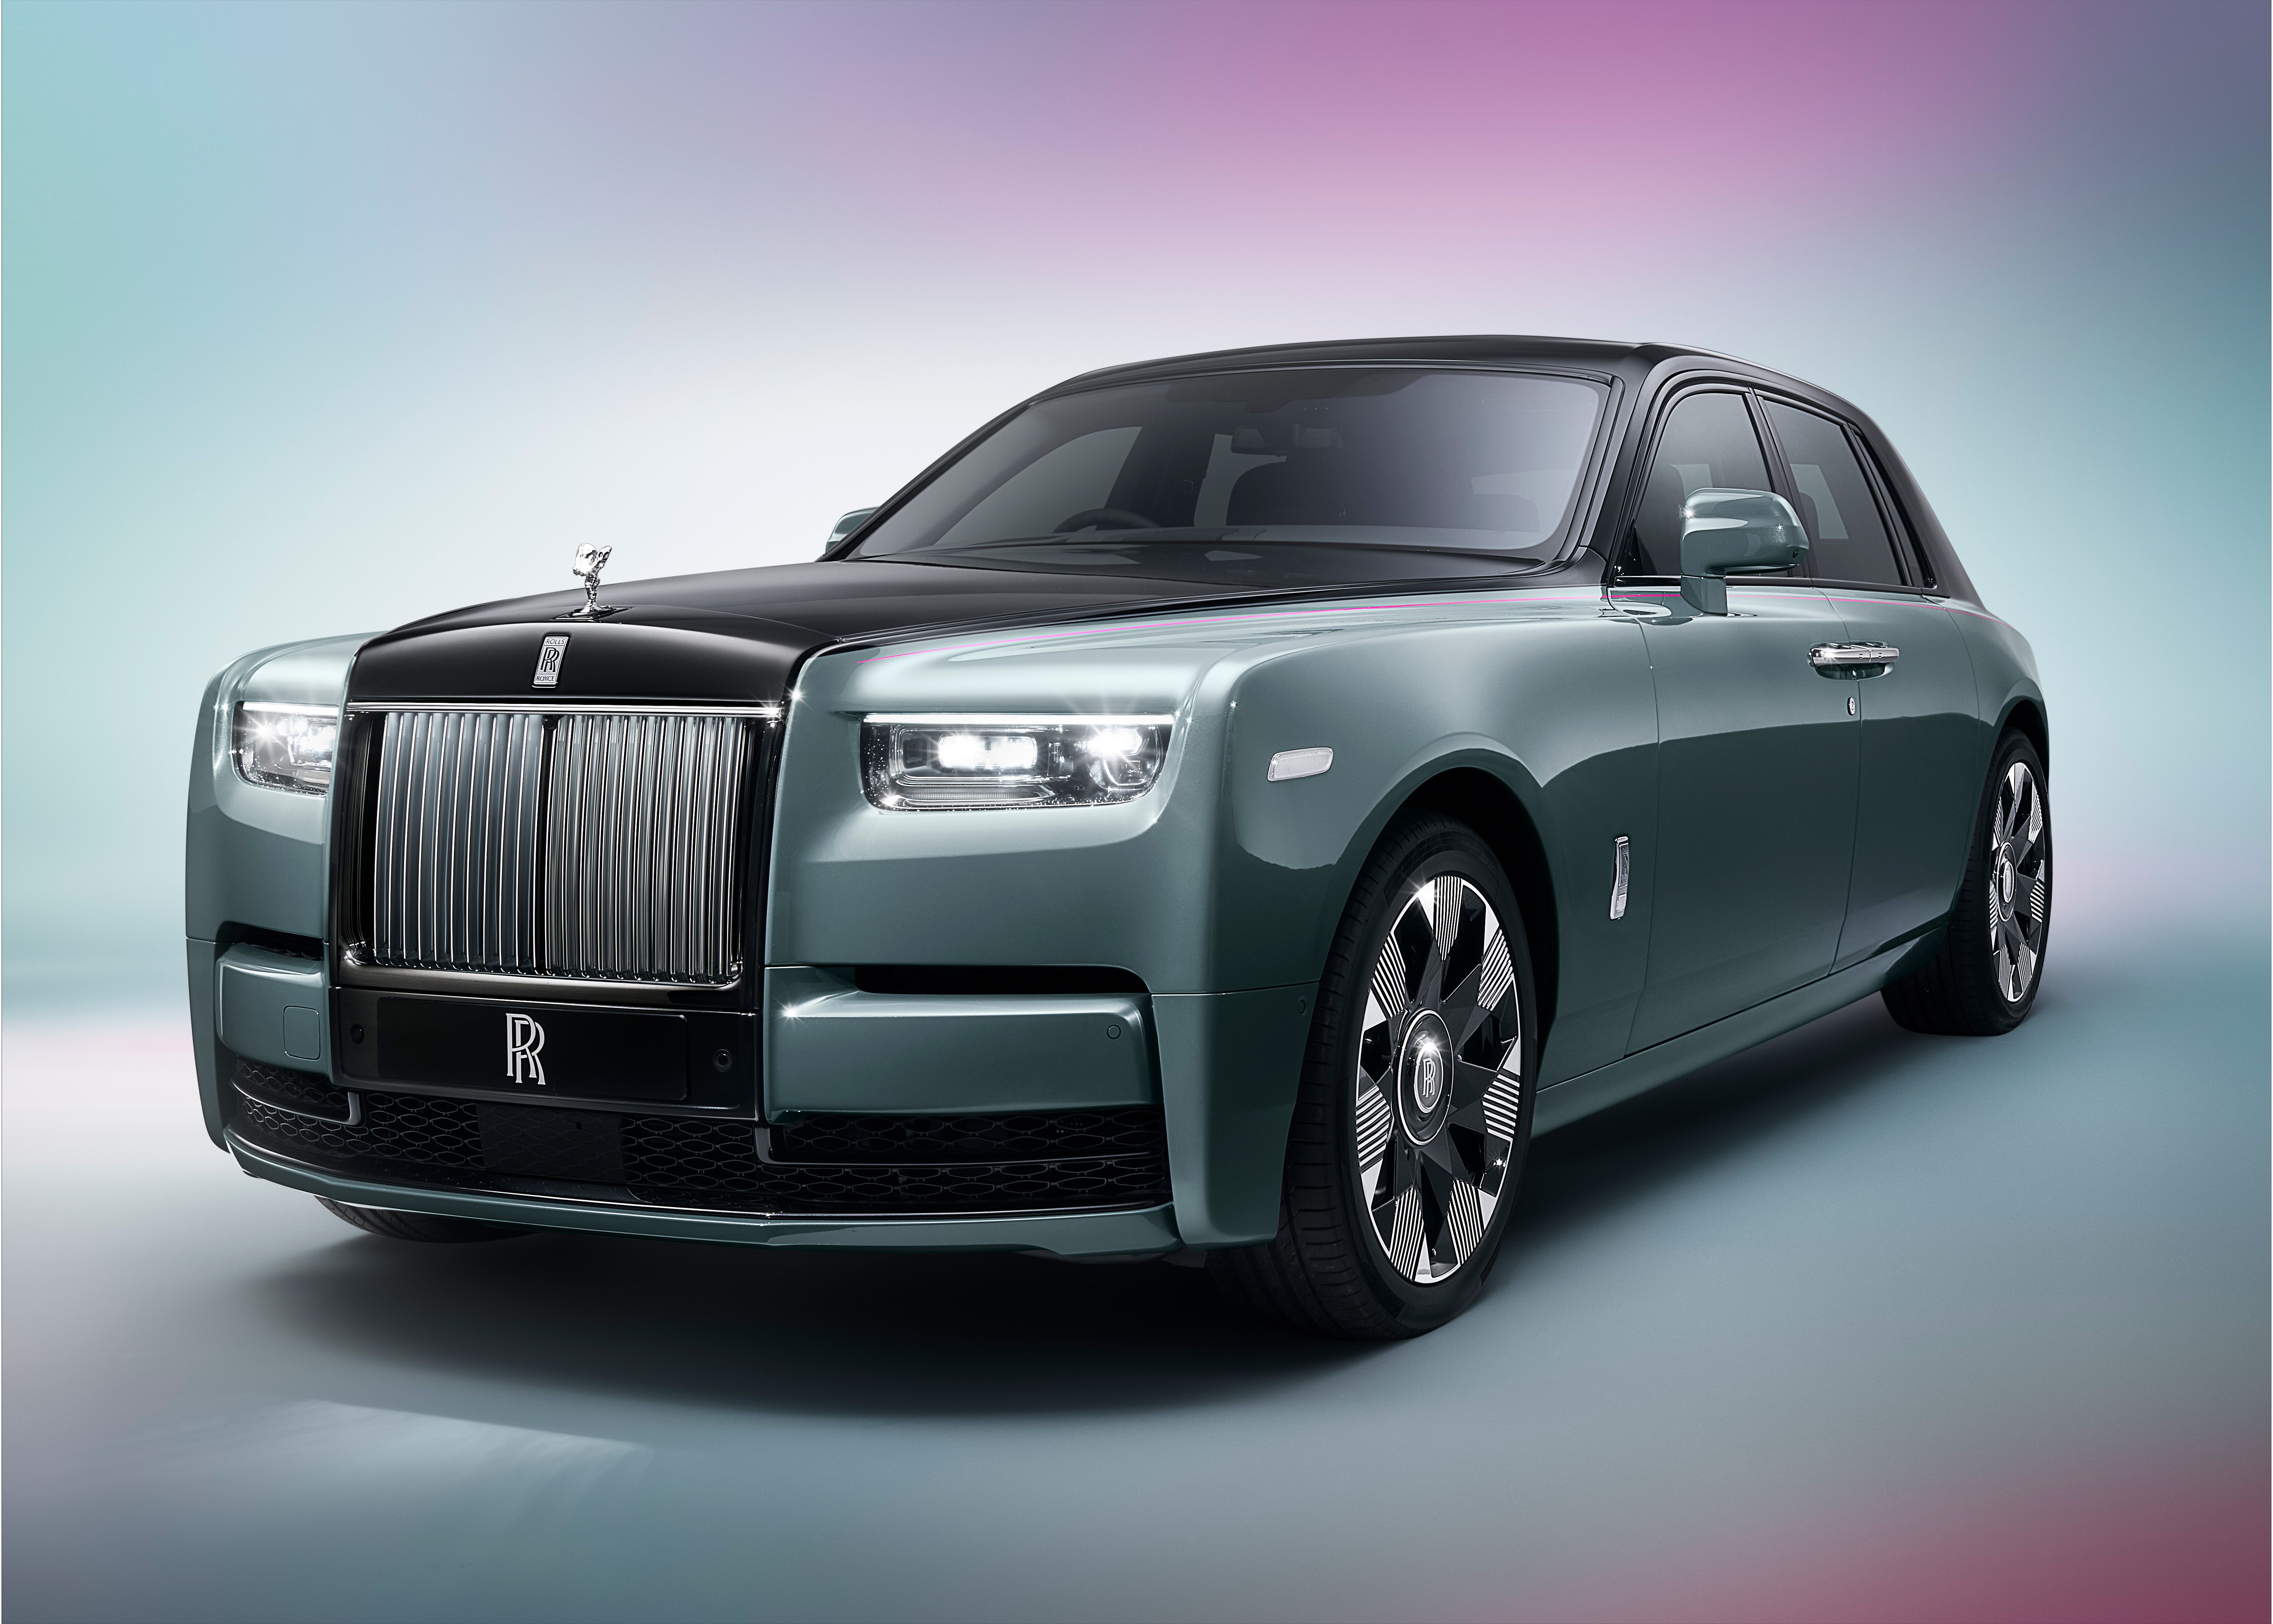 RollsRoyce Wraith with the direction of the new generation sports coupes  sleek new page  Rolls royce coupe Rolls royce Rolls royce sports car